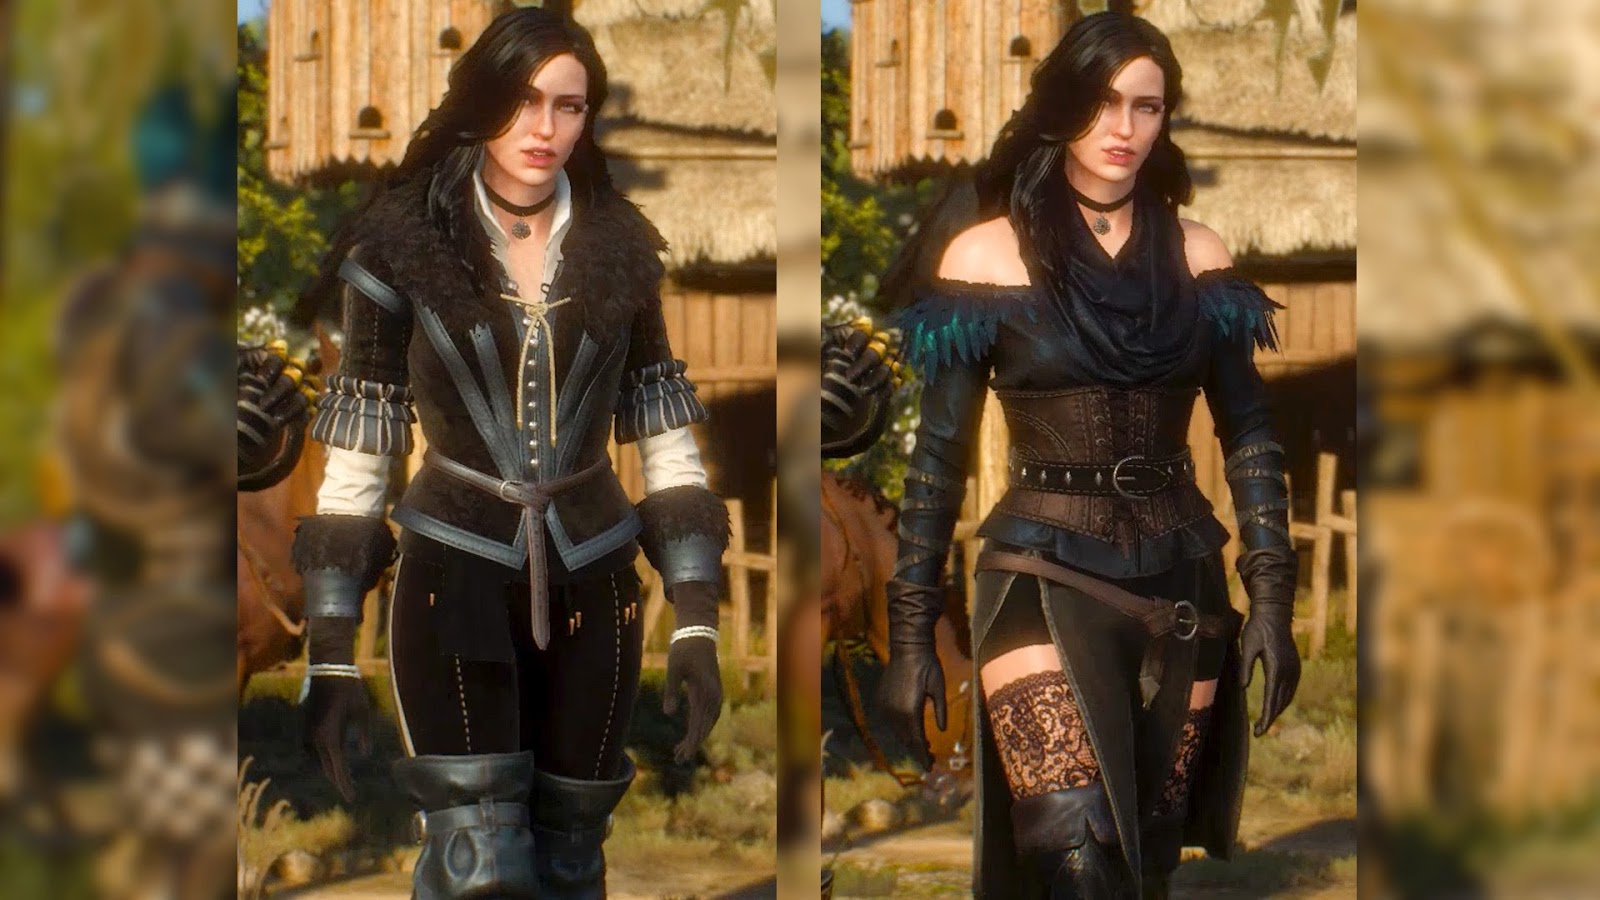 The witcher 3 alternative look for yennefer фото 1